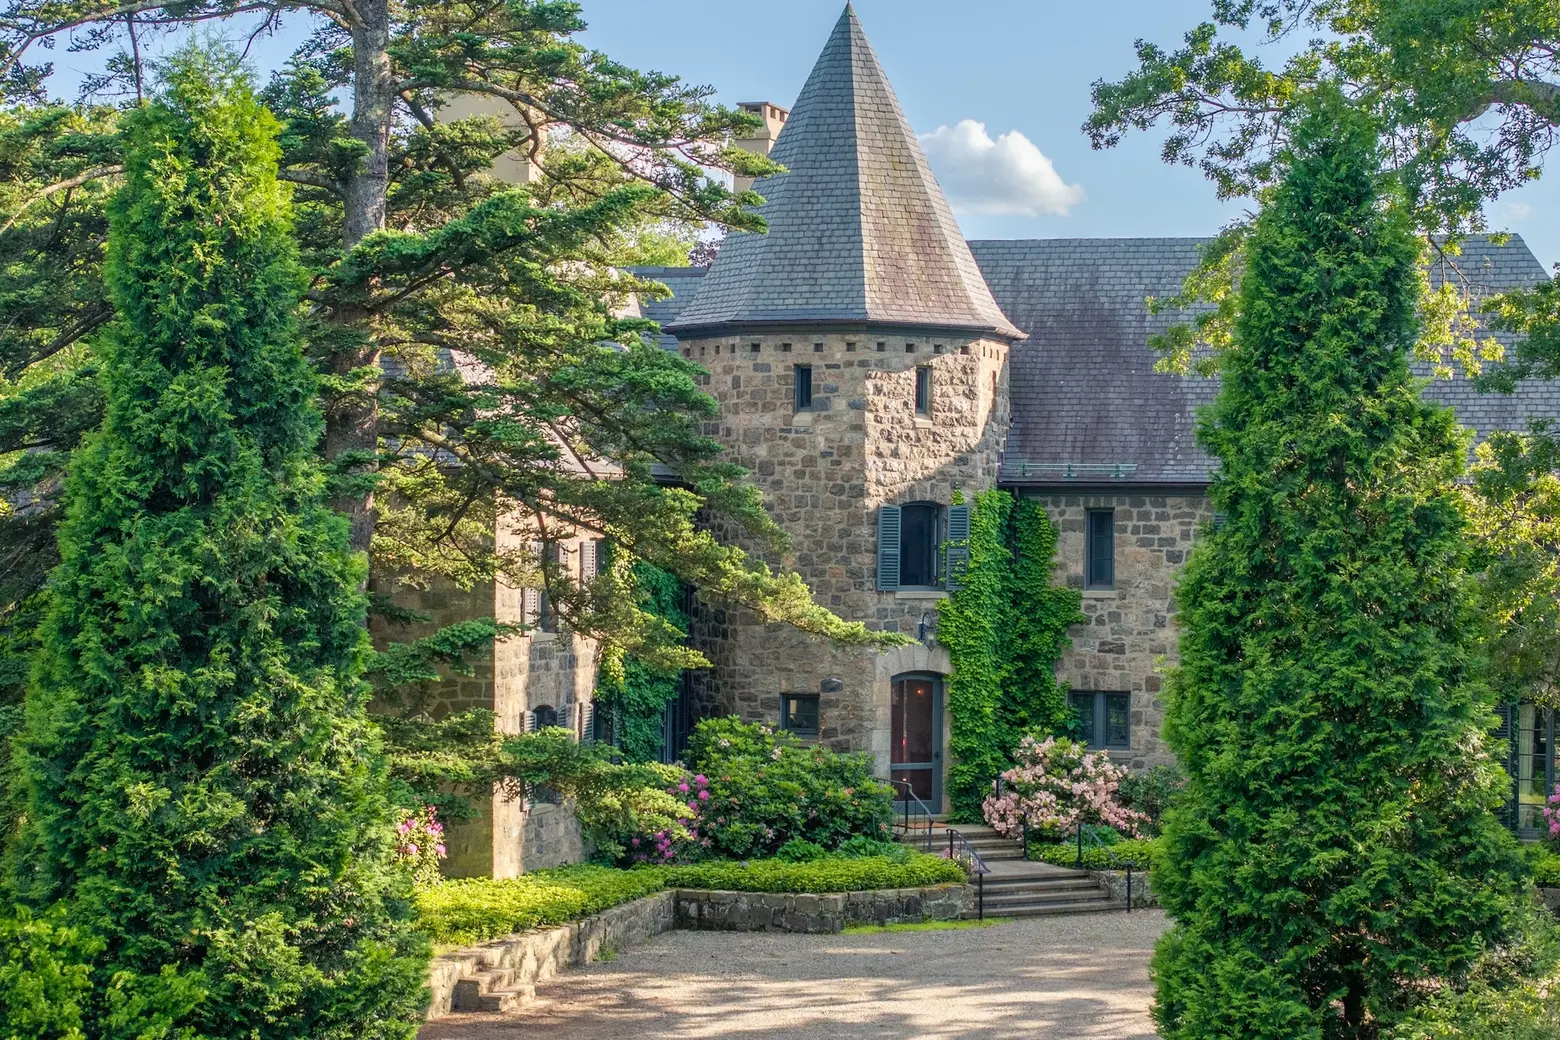 Live a life of country grandeur at this $12.25M French-inspired stone chateau in Garrison, N.Y.